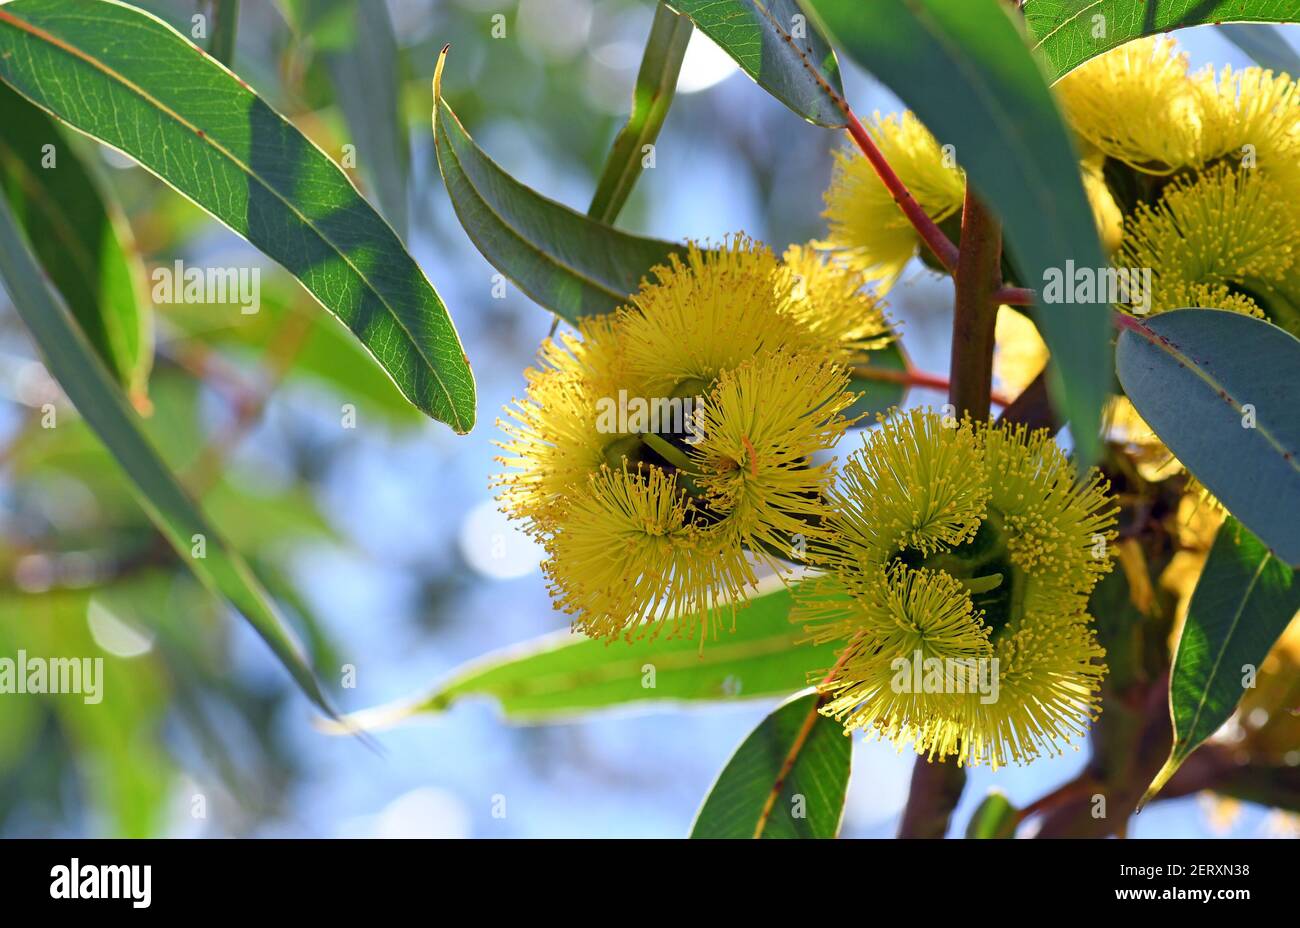 Vibrant yellow flowers of the mallee gum tree Eucalyptus erythrocorys, family Myrtaceae. Also known as the Illyarrie, Red capped Gum or Helmet nut gum Stock Photo